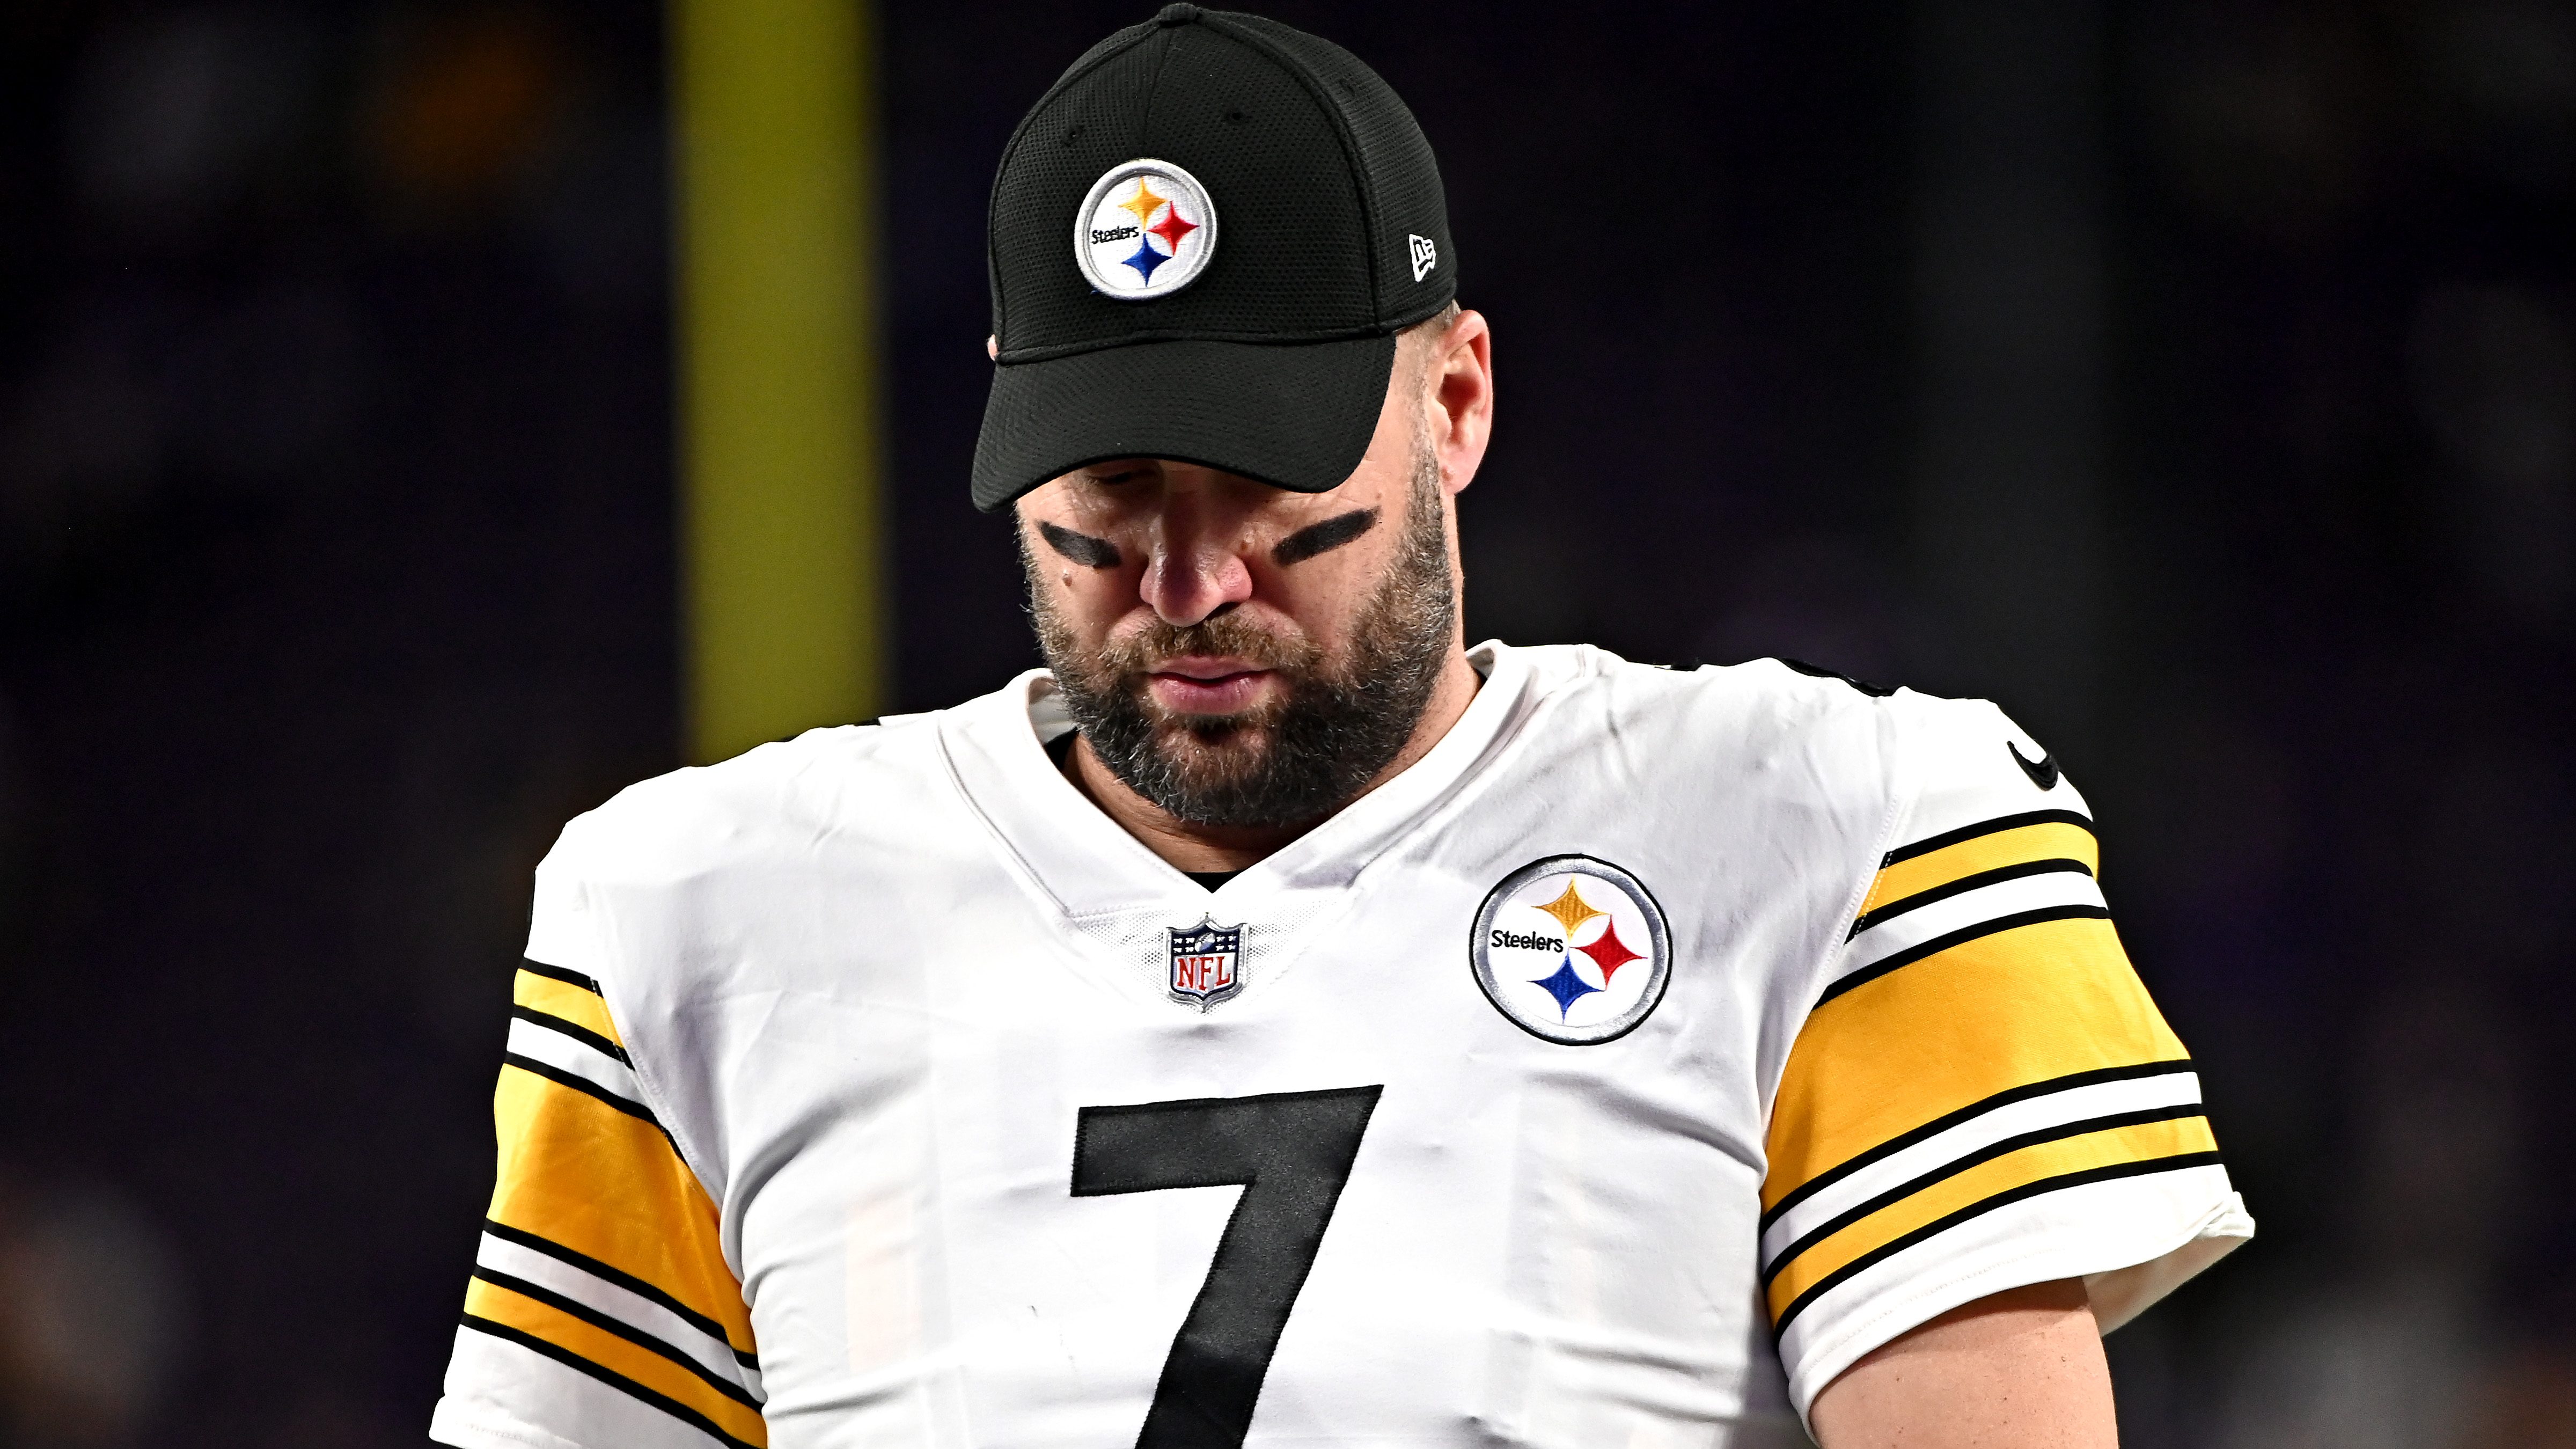 Ben Roethlisberger Has Telling Comments on Playing for Another